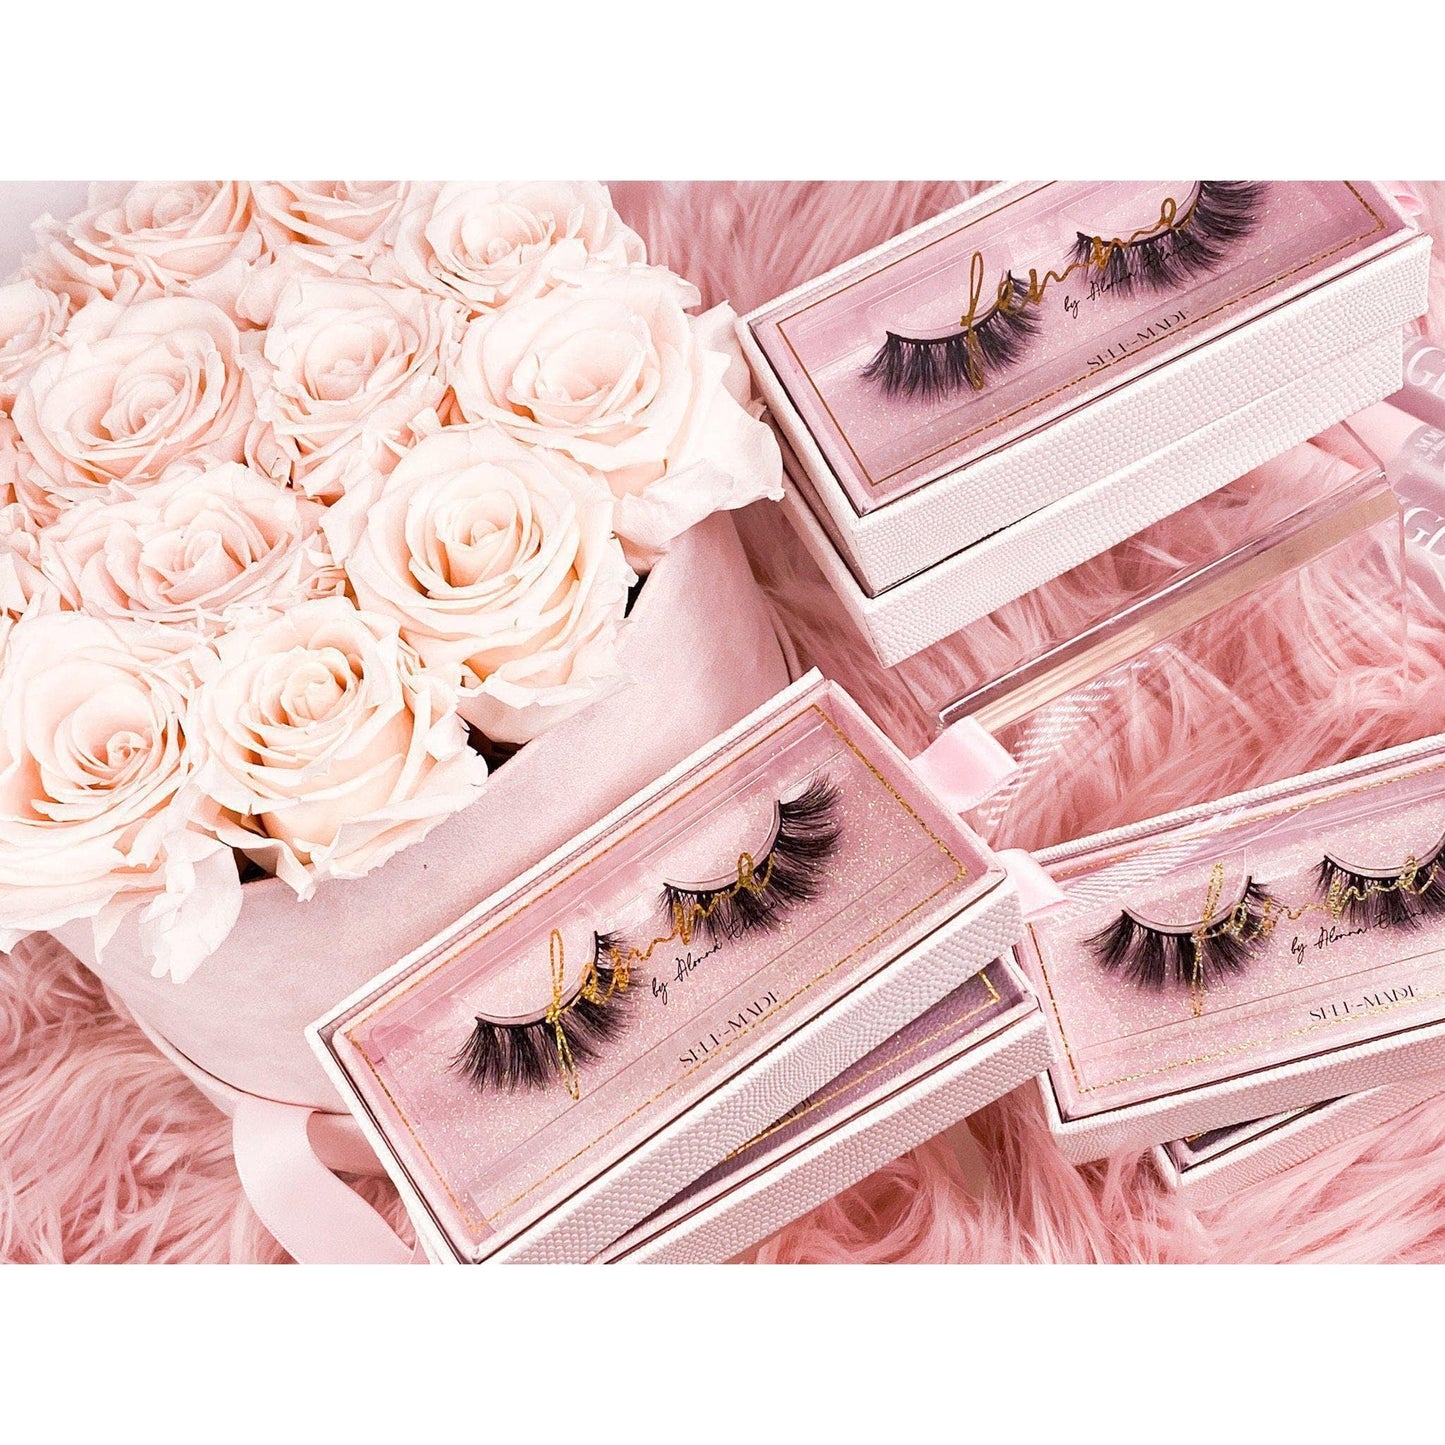 SELF-MADE | luxe vegan lashes - FEMME by Alonna Elaine